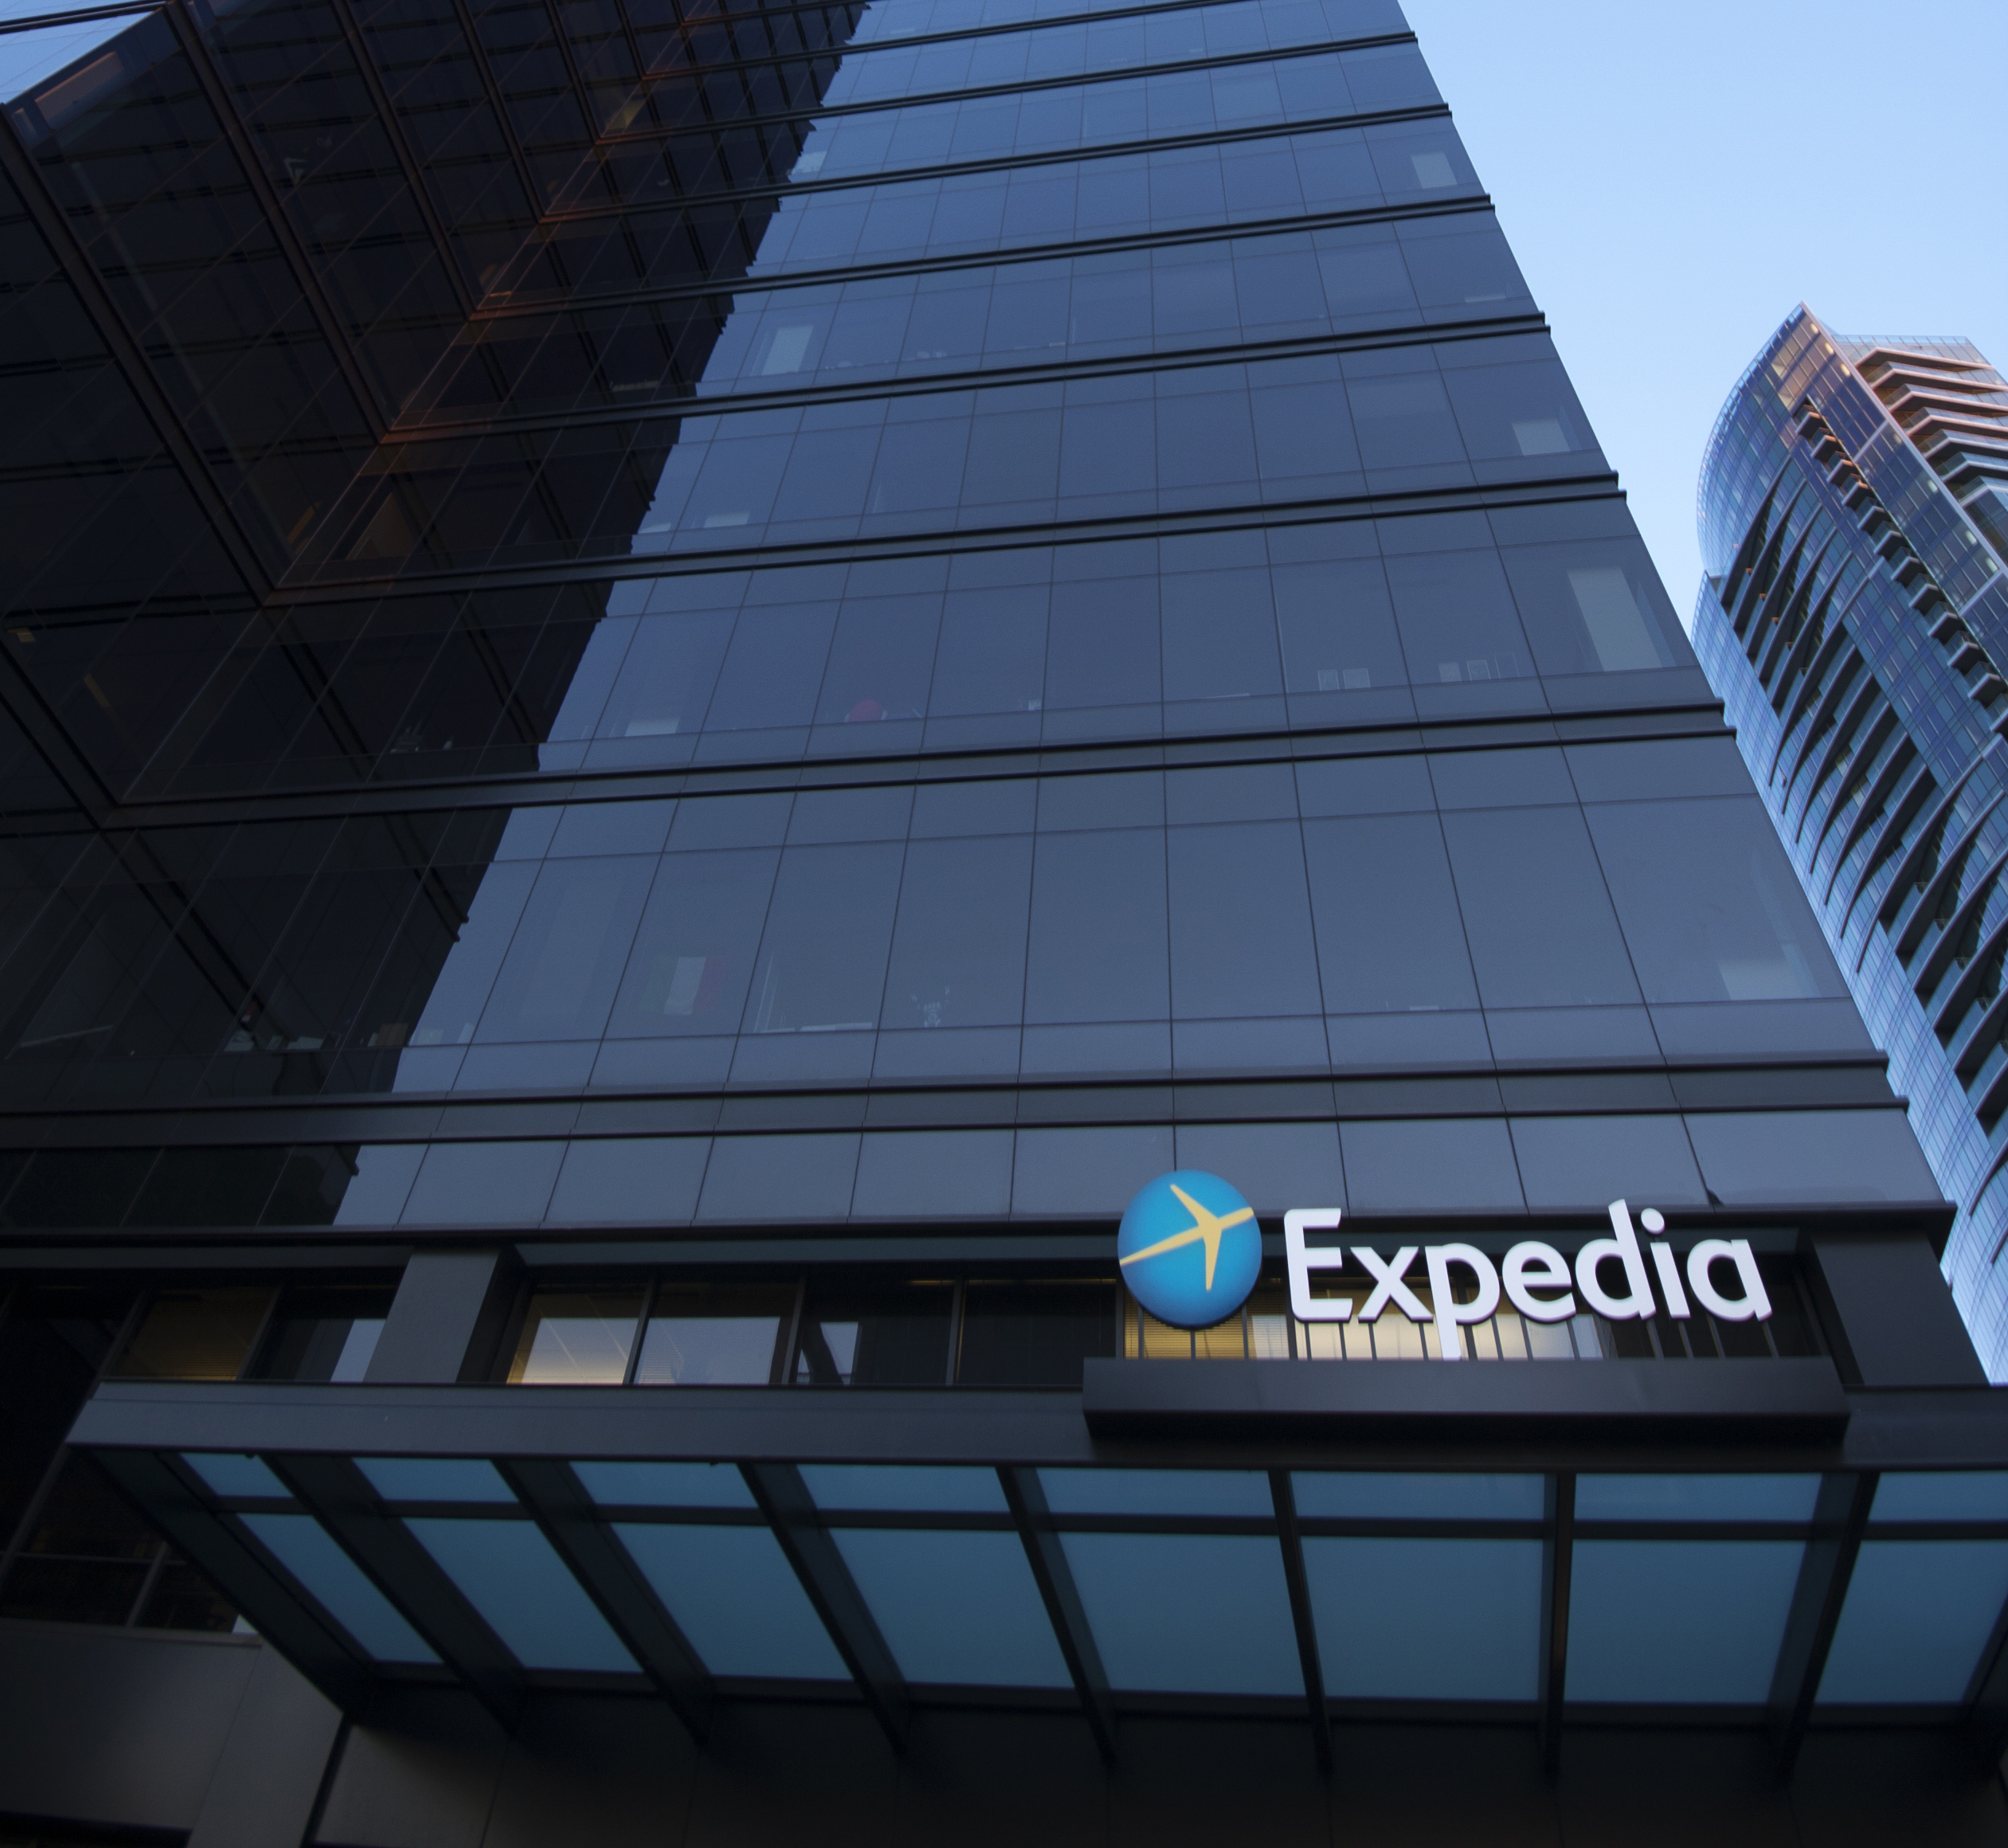 Expedias Q4 2017 earnings call shows signs that hotel companies campaign for direct bookings is working and the OTA may no